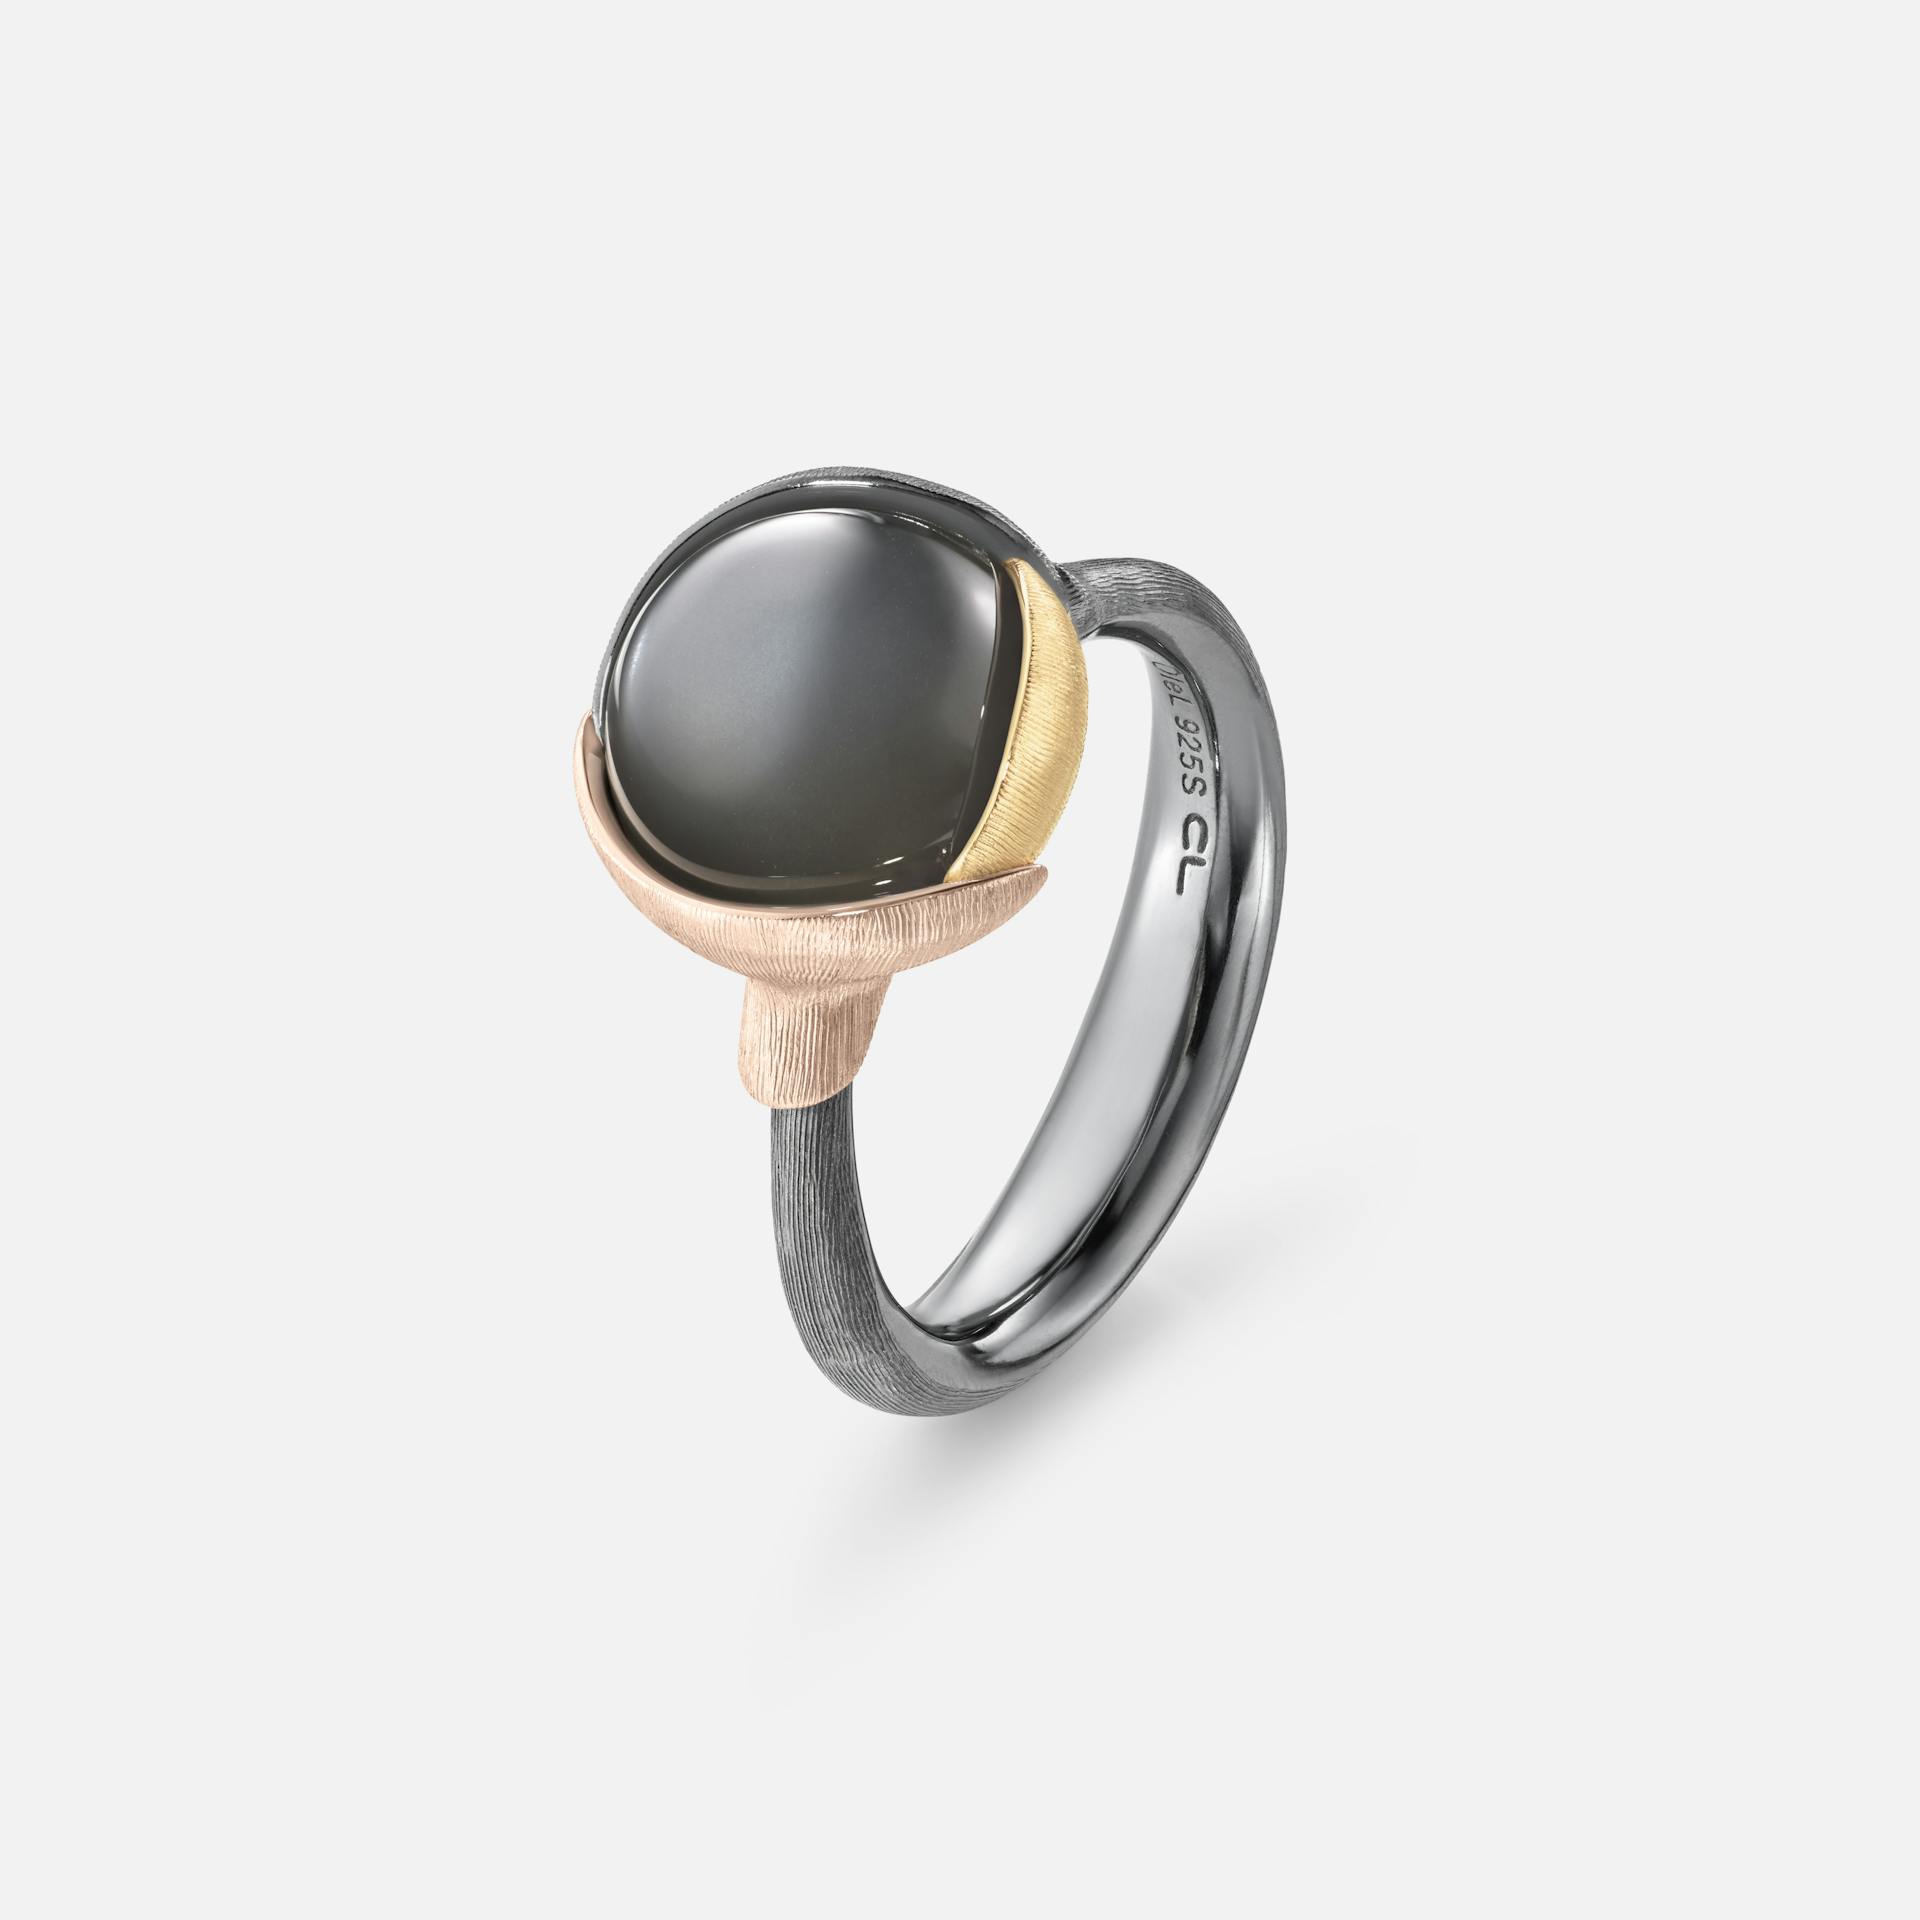 Lotus Ring size 2 in Gold & Oxidized Sterling Silver with Grey Moonstone  |  Ole Lynggaard Copenhagen